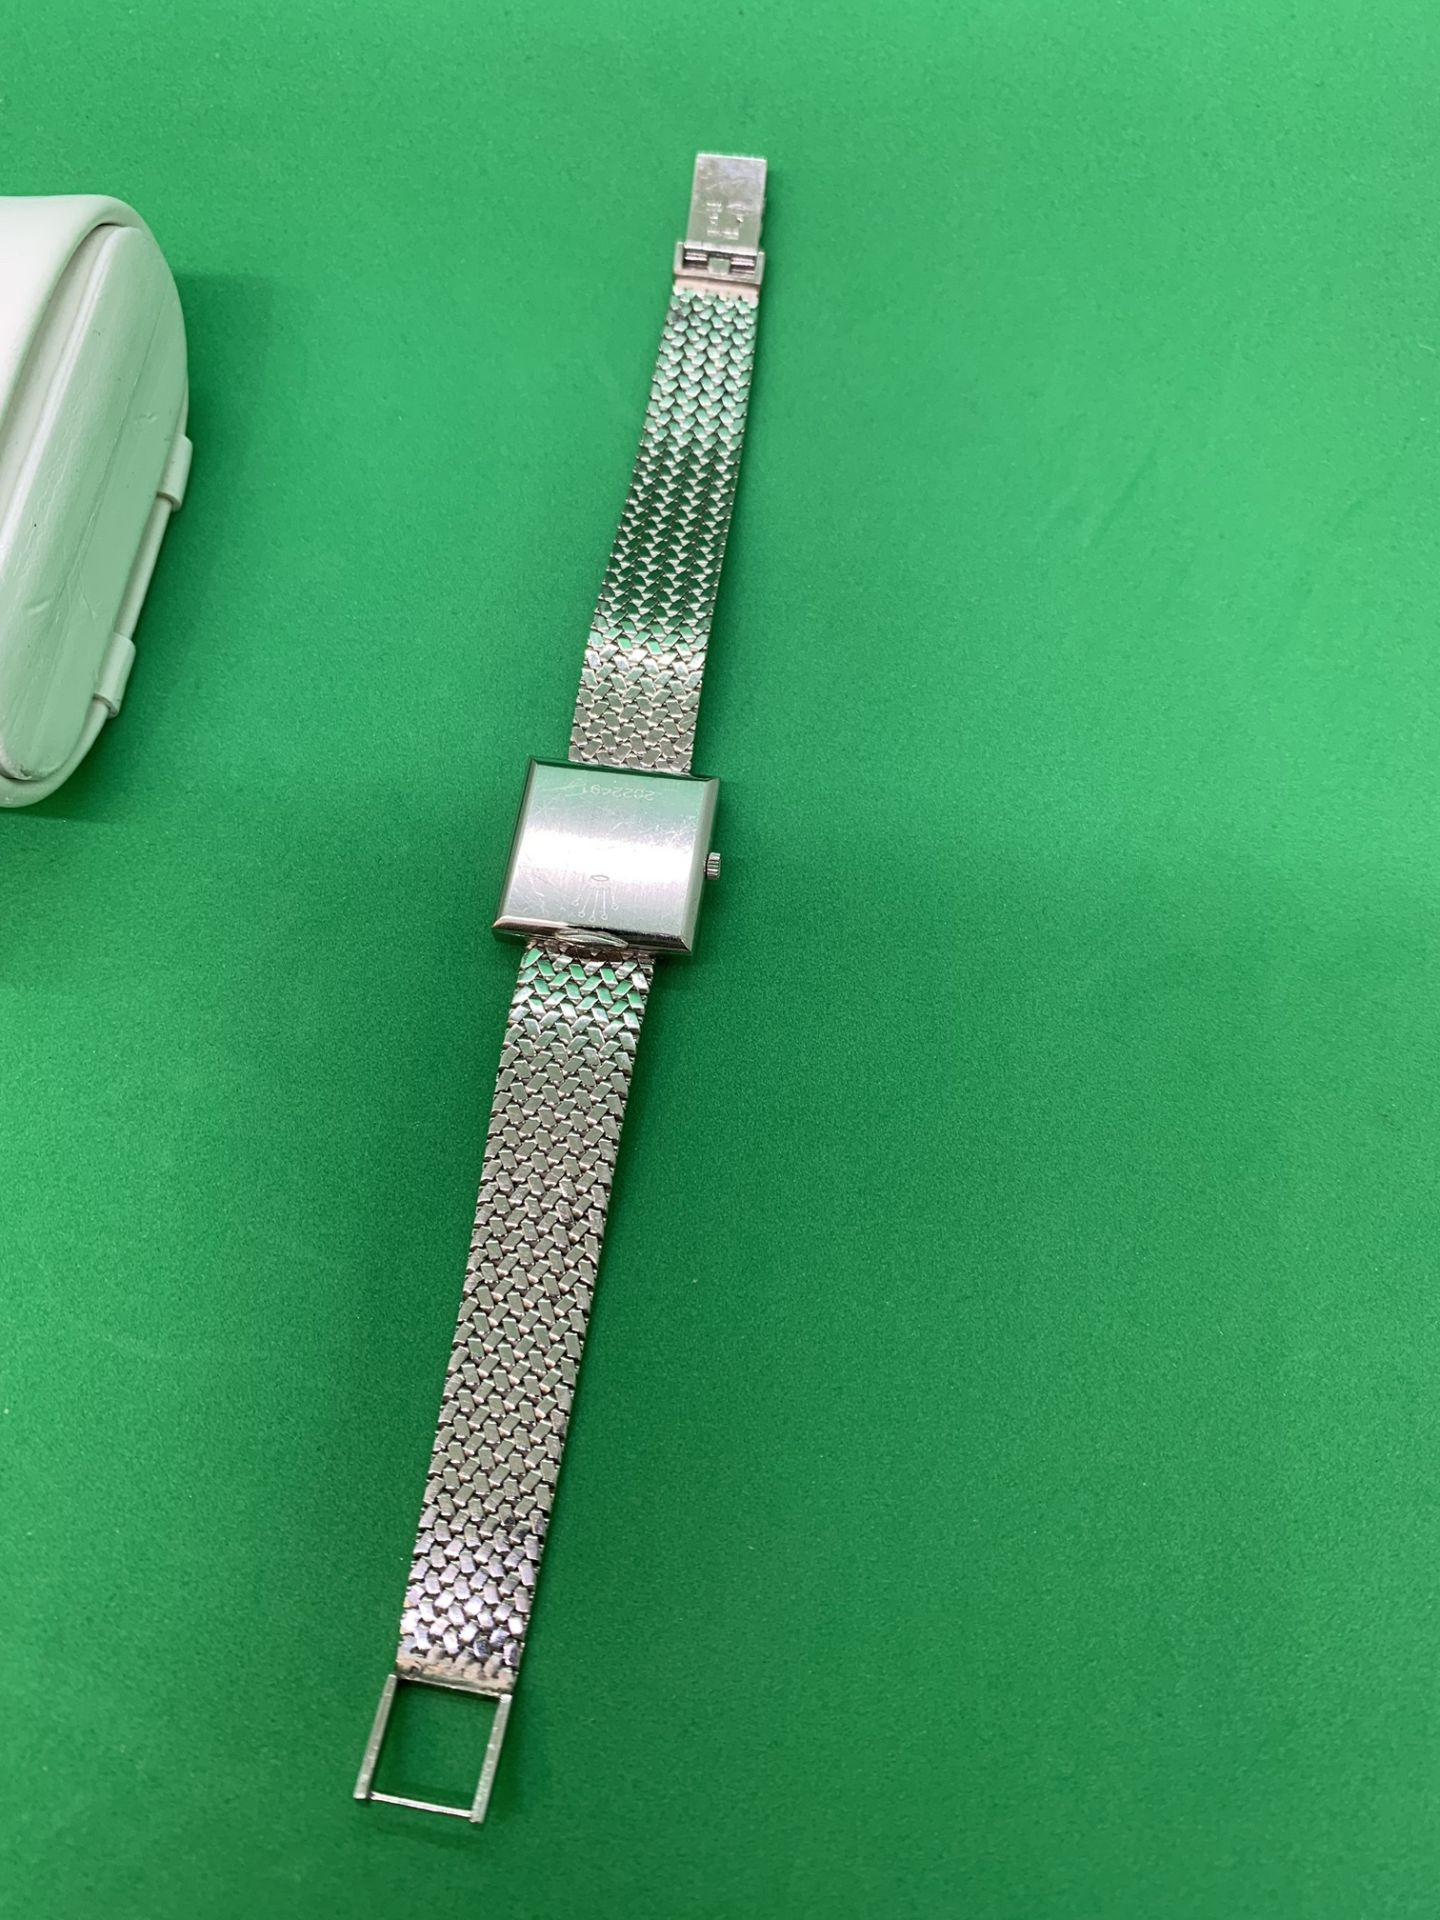 18ct WHITE GOLD ROLEX CELLINI WATCH - Image 9 of 9